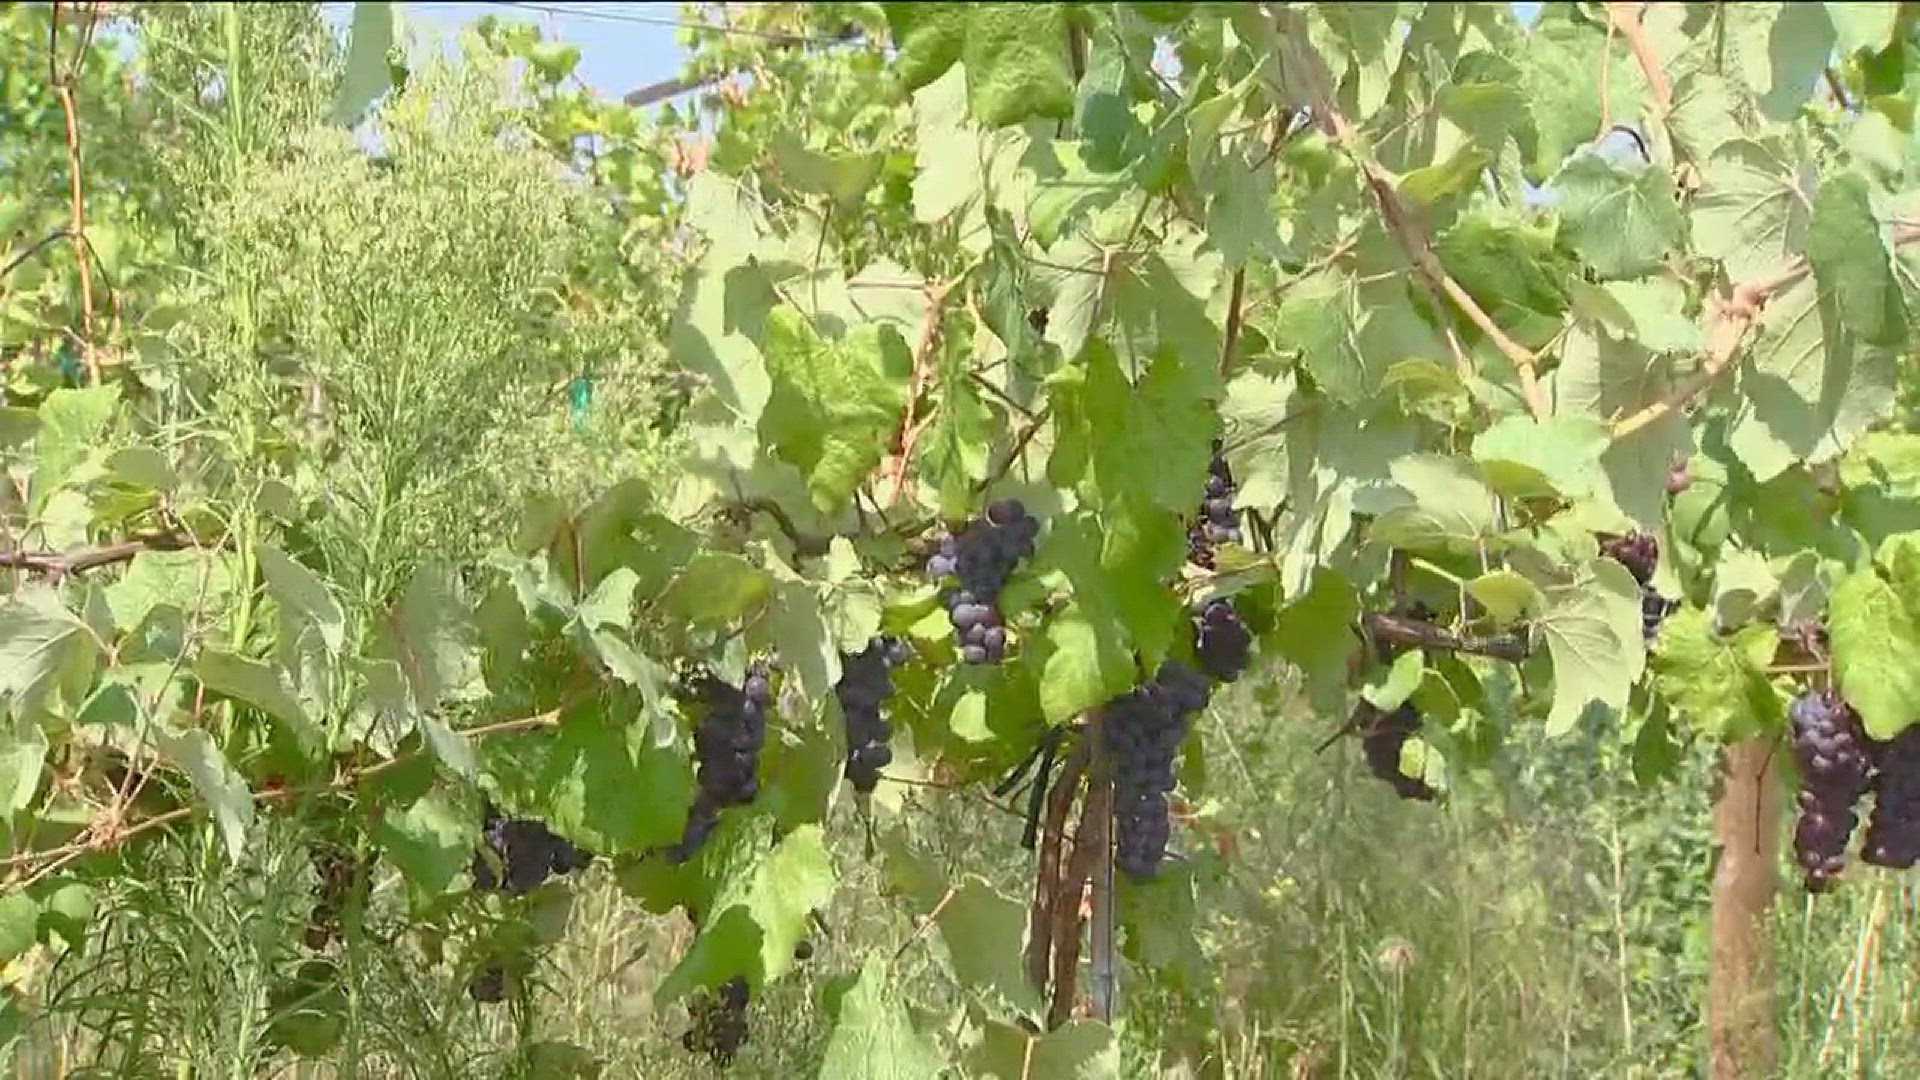 It's not all bad news for Idaho's fruit crop.